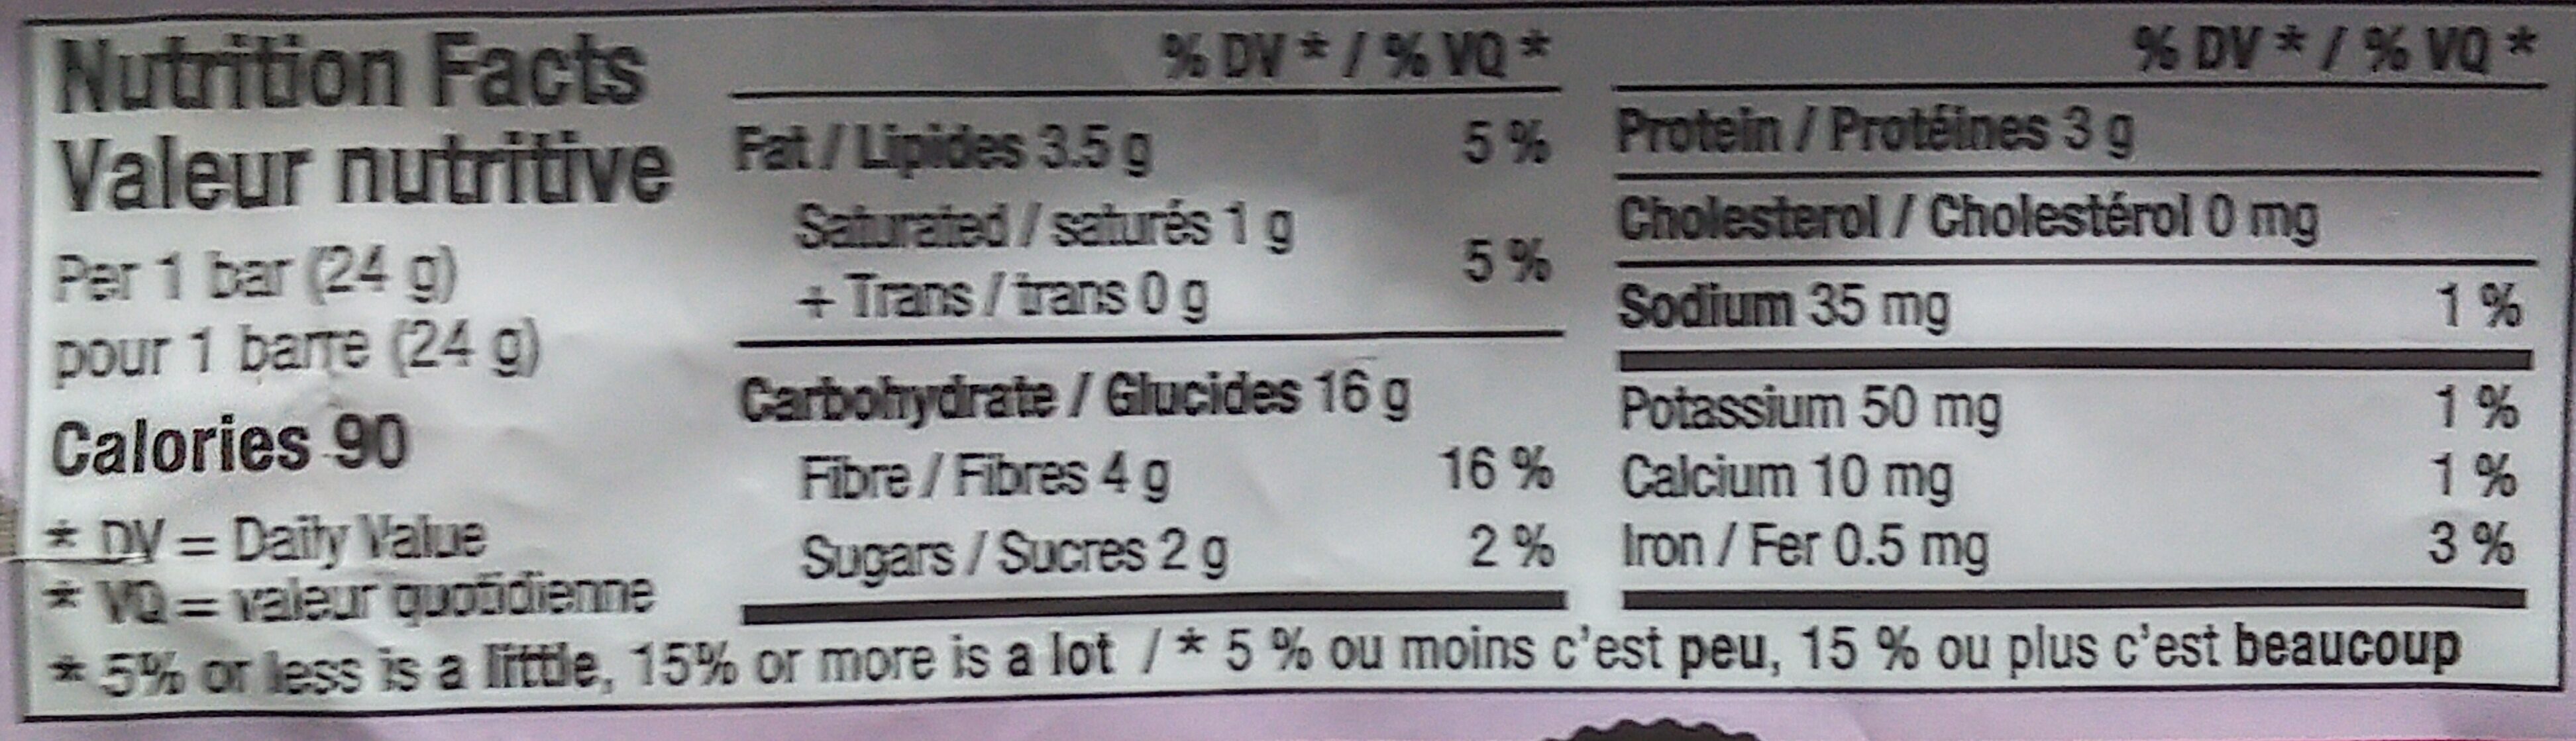 Double Chocolate Bar - Nutrition facts